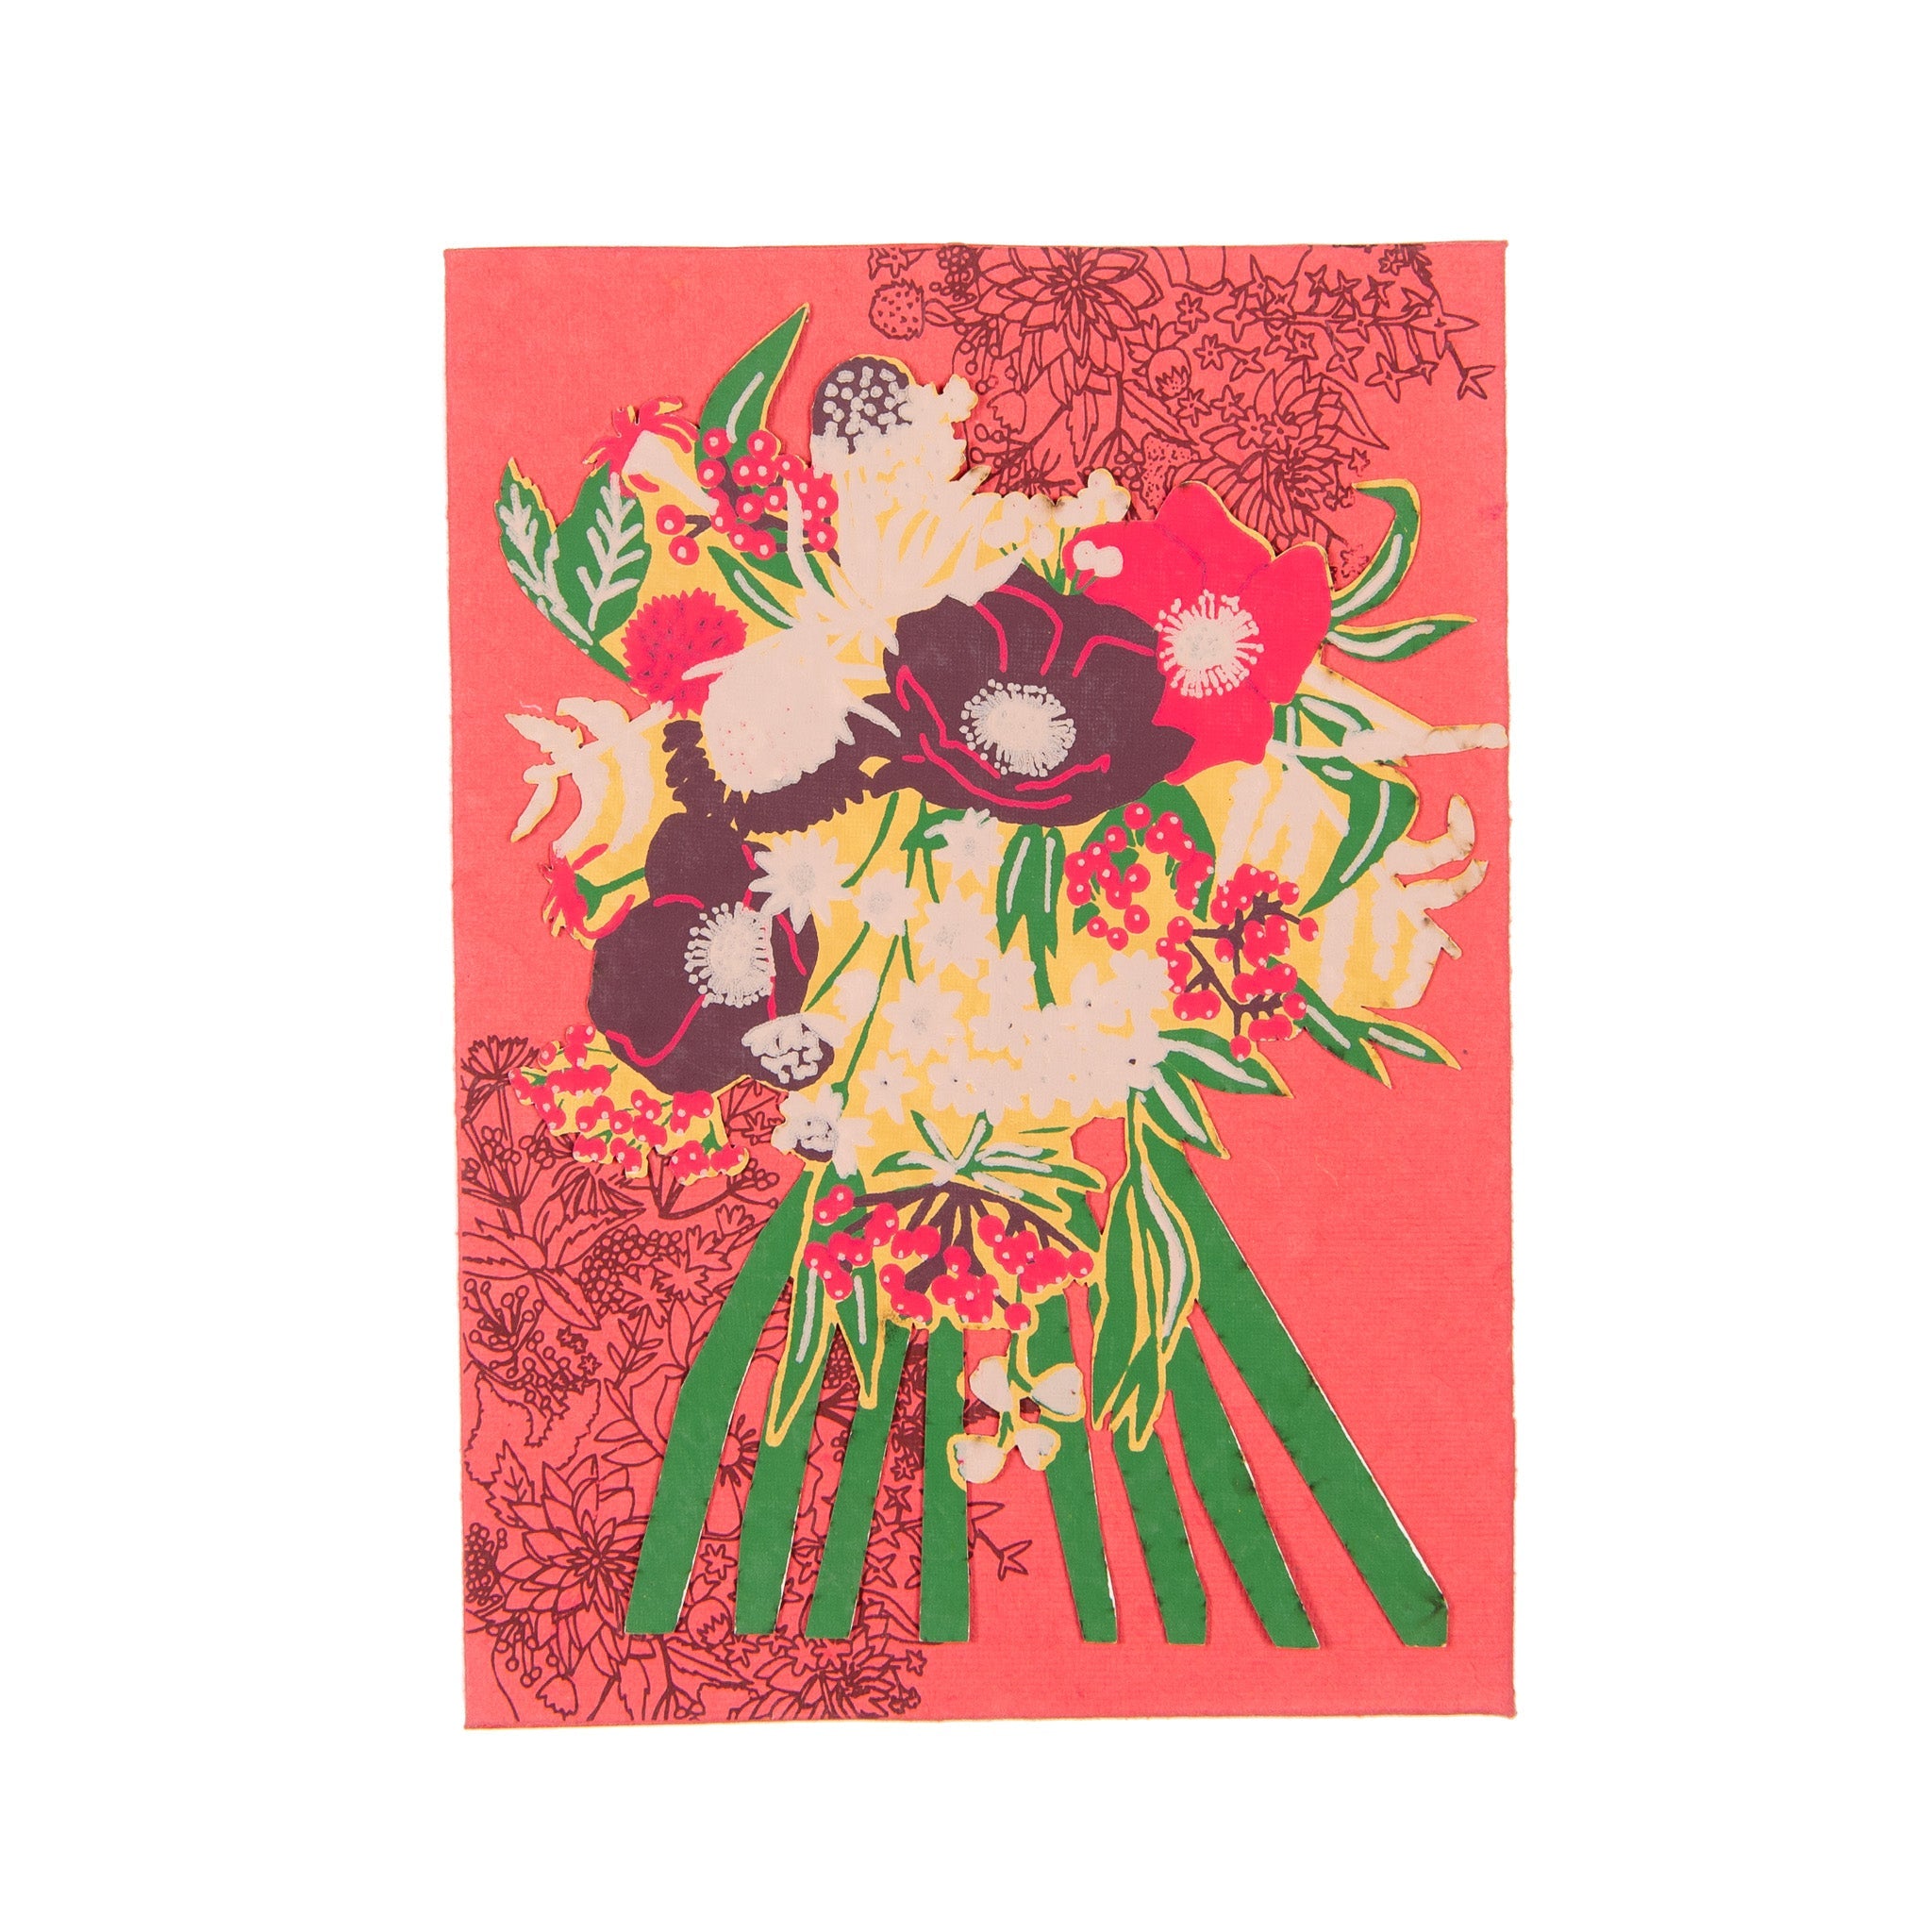 EAST END PRESS GREETING CARD Peony Bouquet